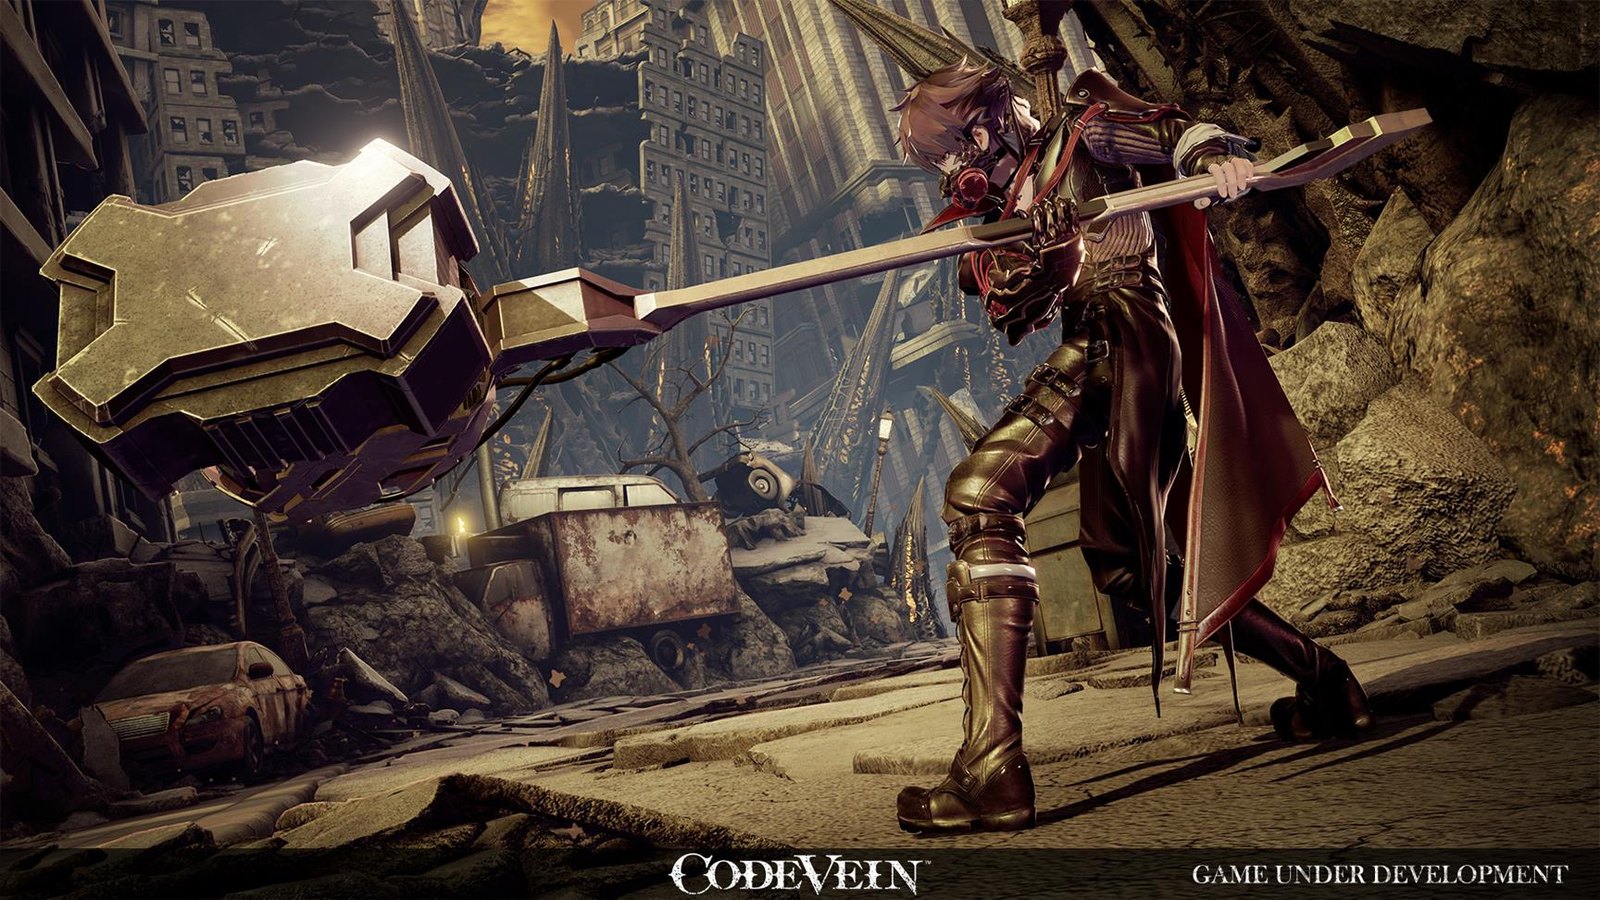 New Code Vein Trailer Shows Off Just How Brutal This Dark Souls